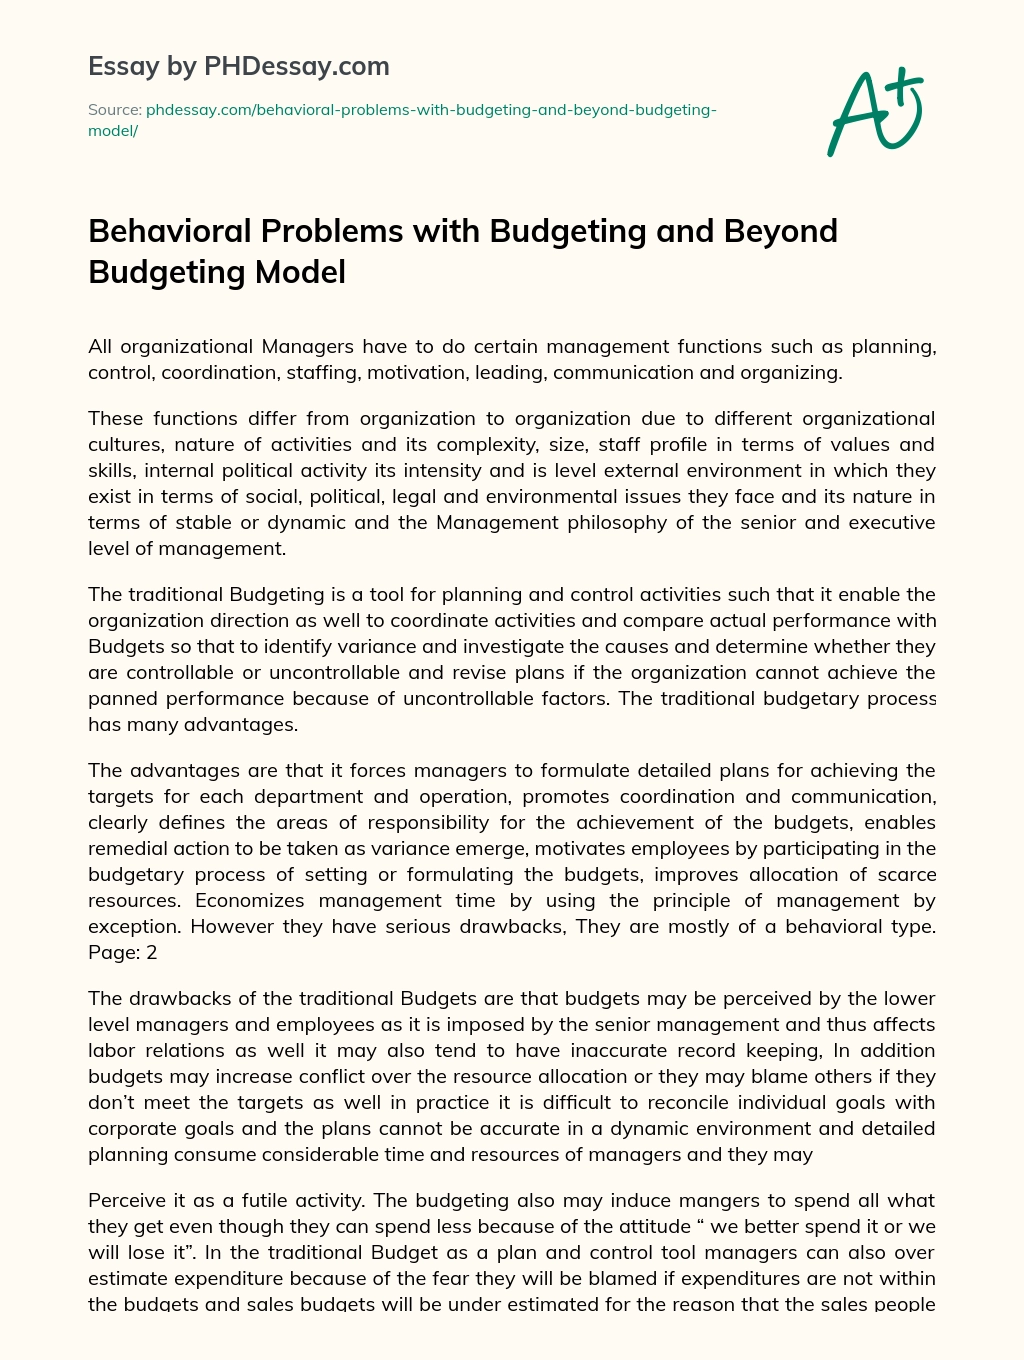 Behavioral Problems with Budgeting and Beyond Budgeting Model essay